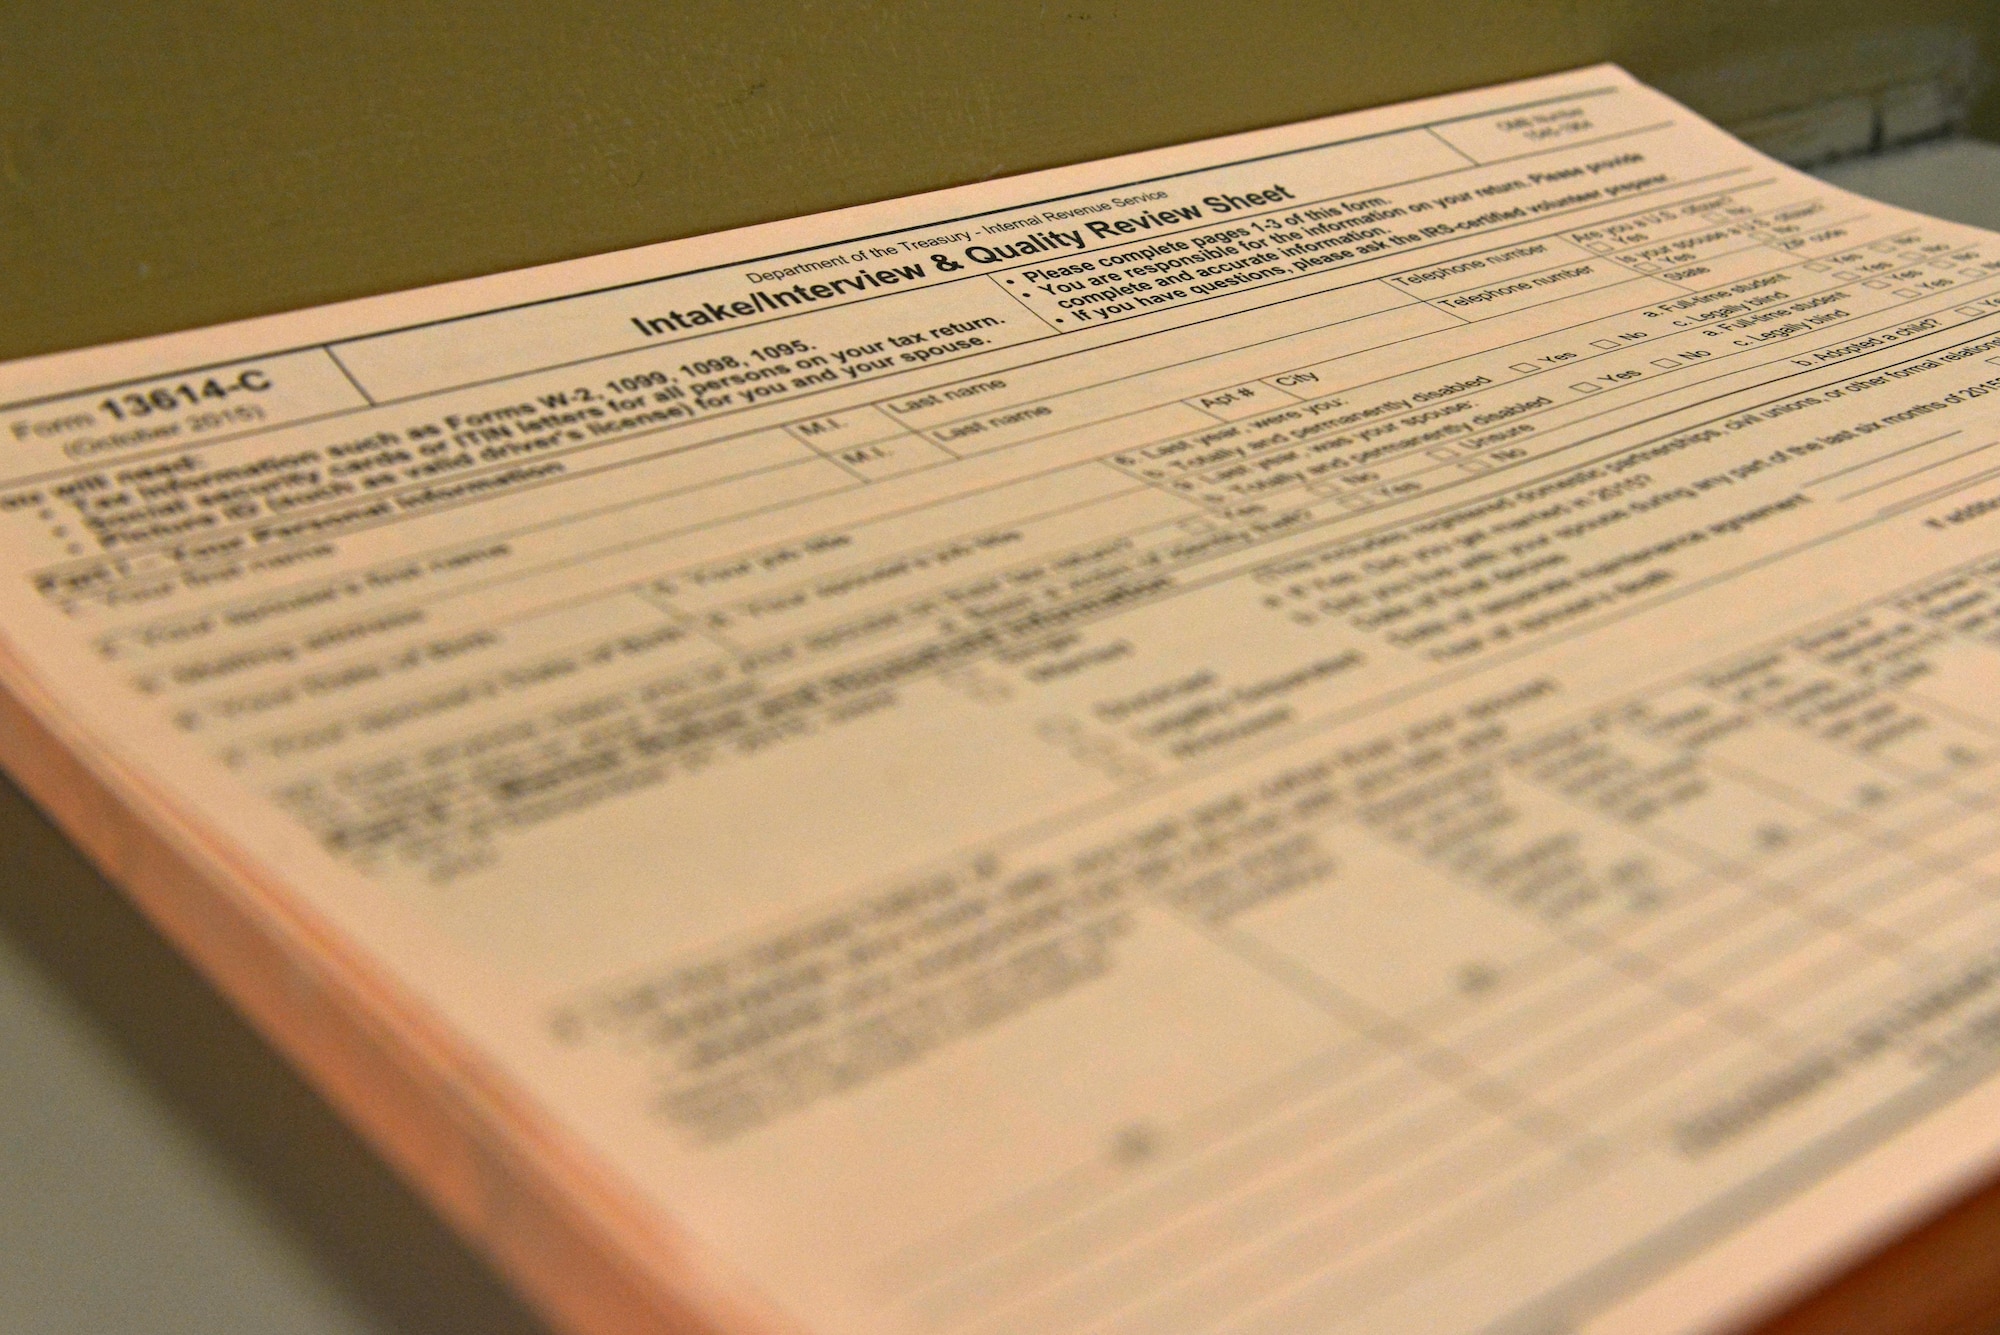 An intake/interview and quality review sheet lays on the front desk of the tax center at Shaw Air Force Base, S.C., Feb. 6, 2017. The form requires identification information such as name and date of birth as well as information from the past year on the income, expenses and life events of the individual filing taxes. (U.S. Air Force photo by Airman 1st Class Destinee Sweeney)